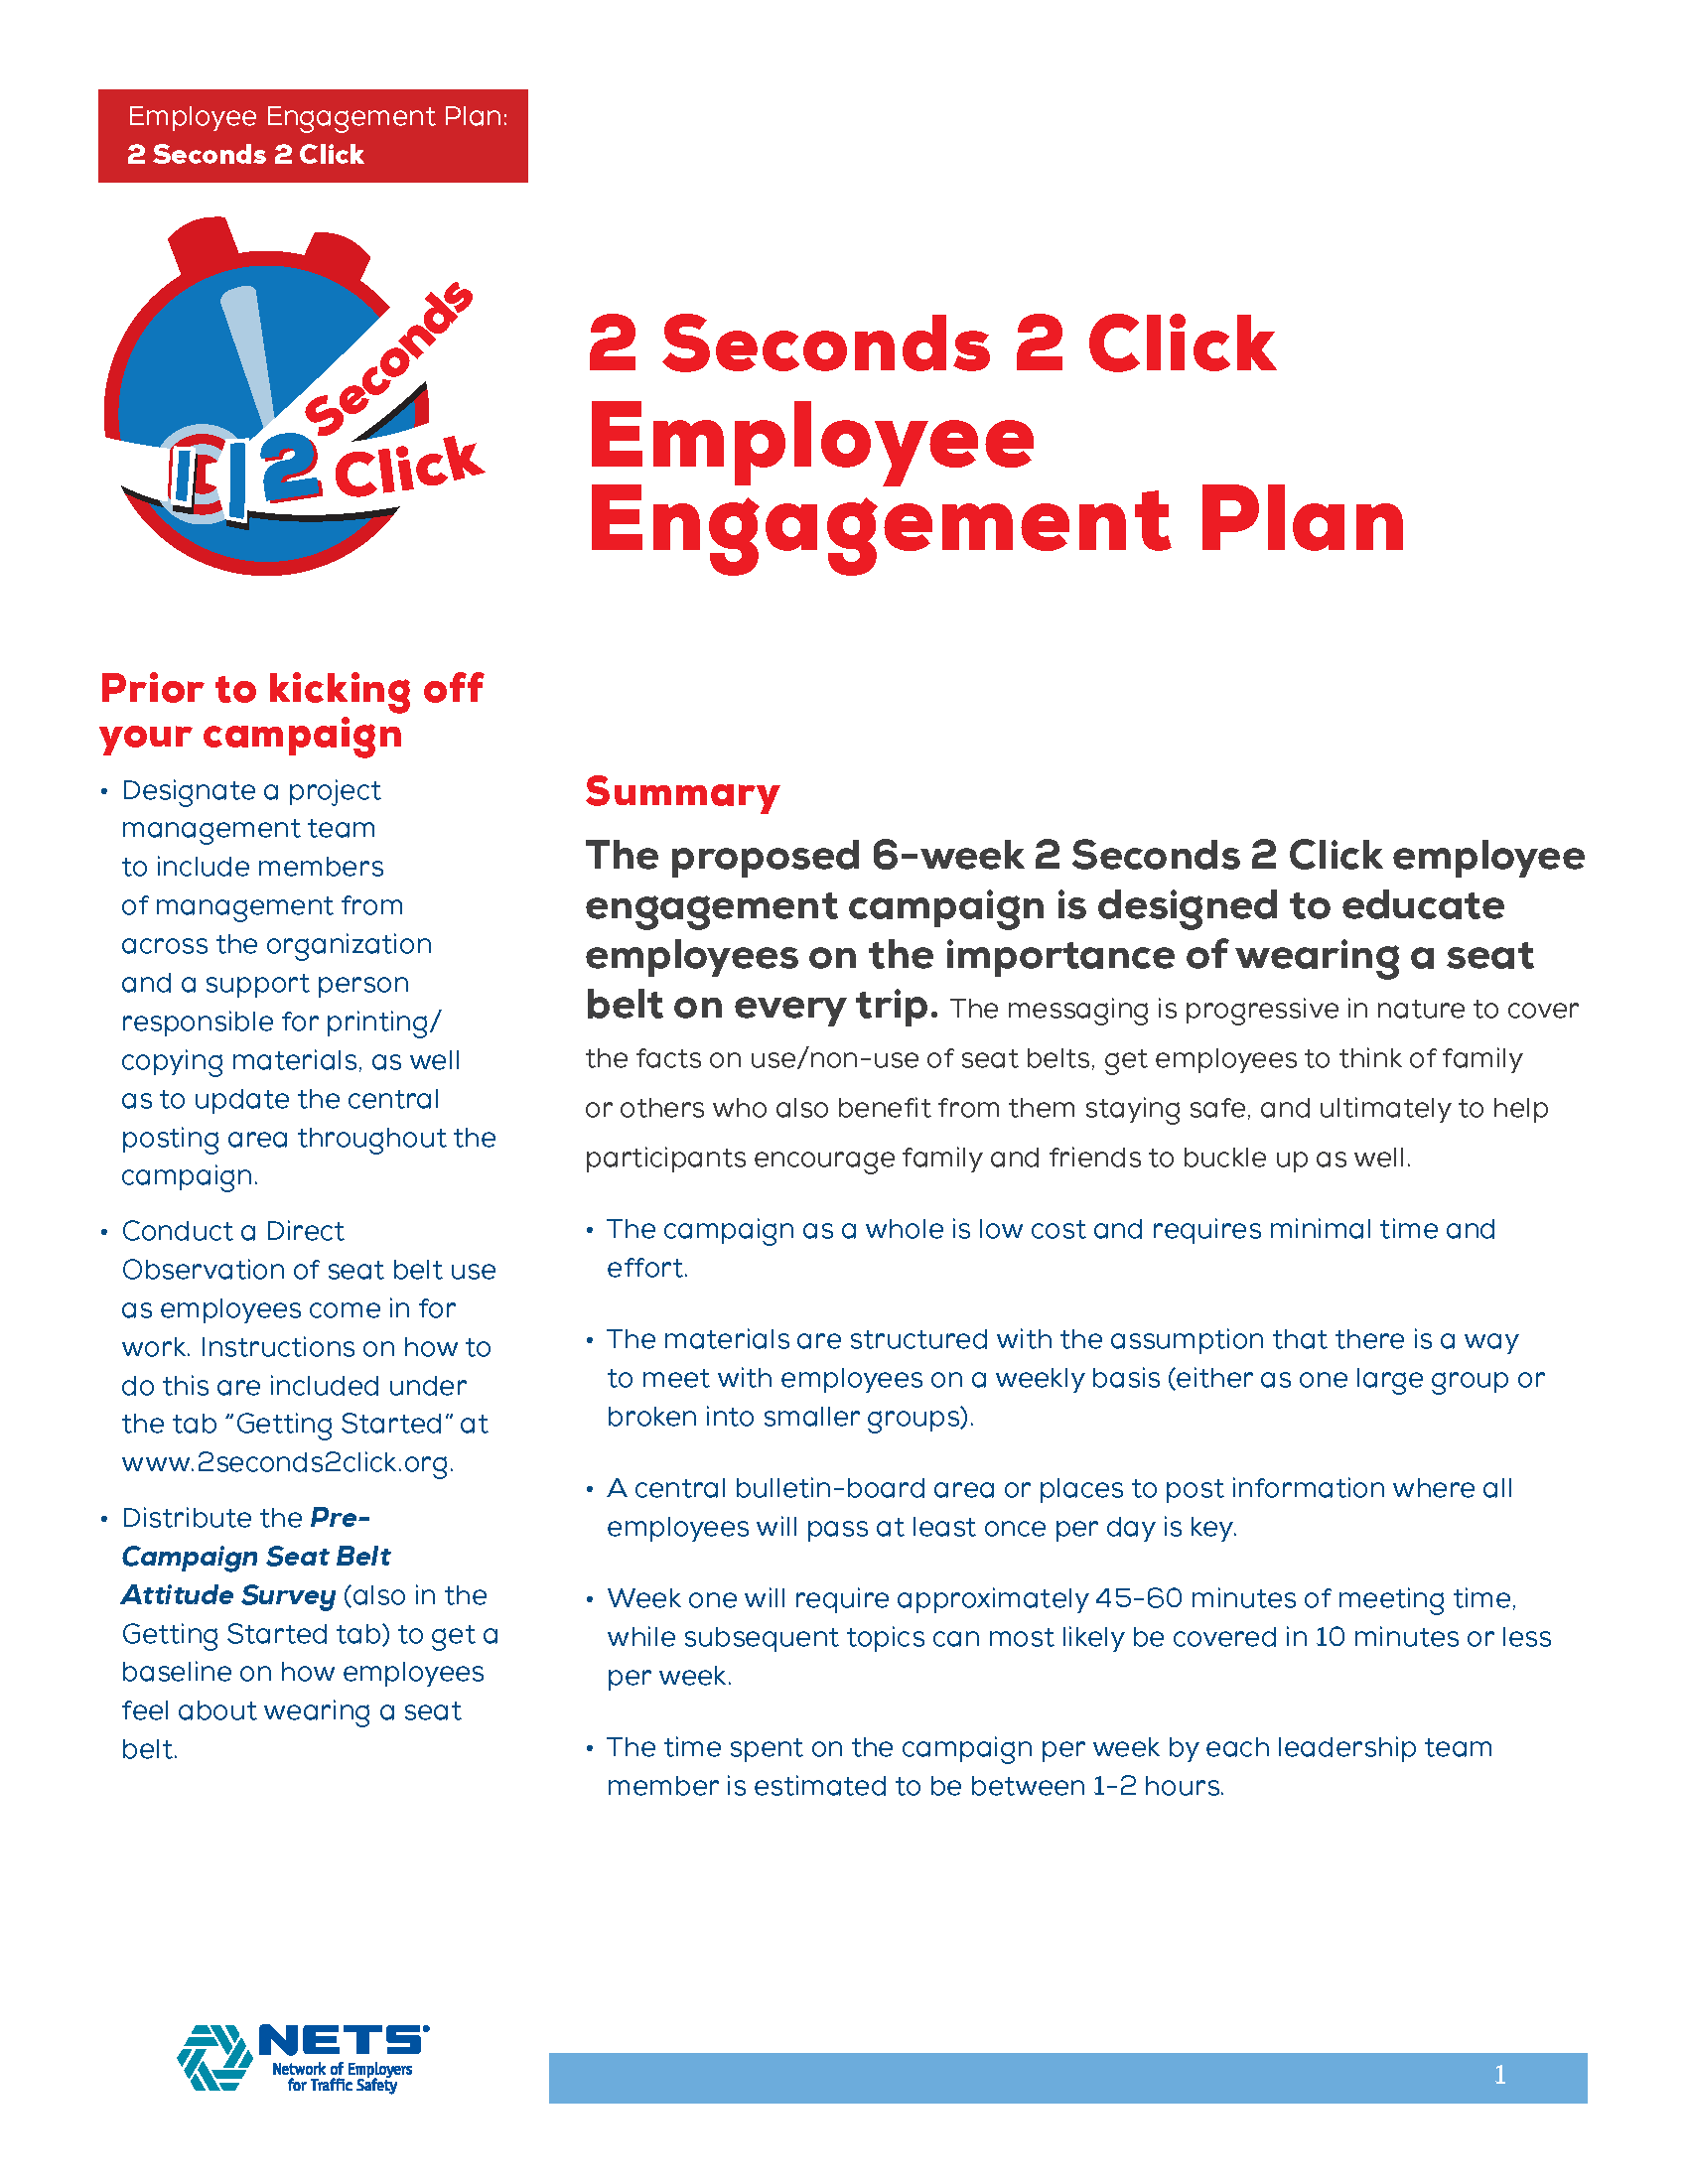 NETS 2 seconds to Click Employee Engagement Plan